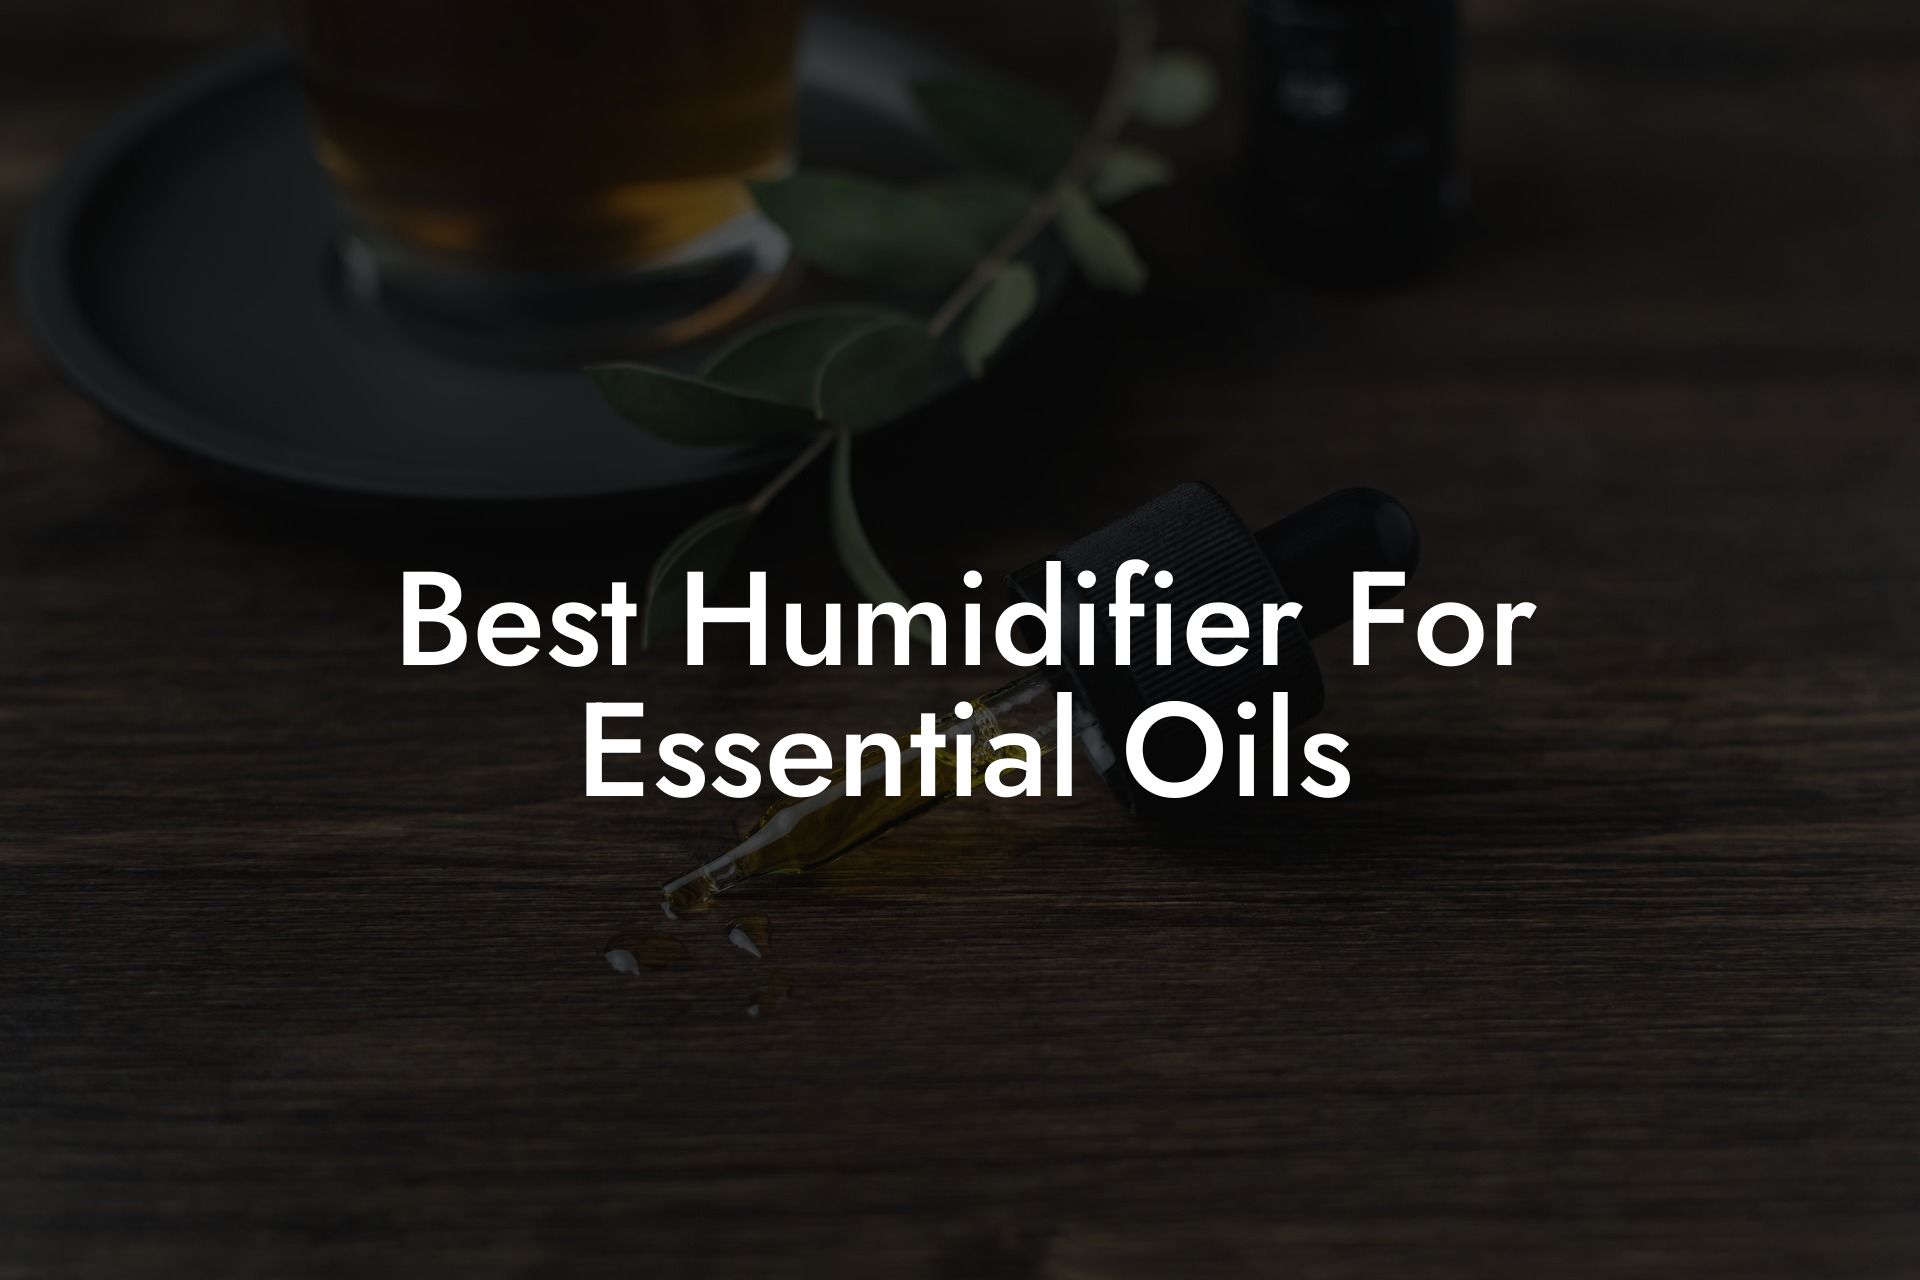 Best Humidifier For Essential Oils